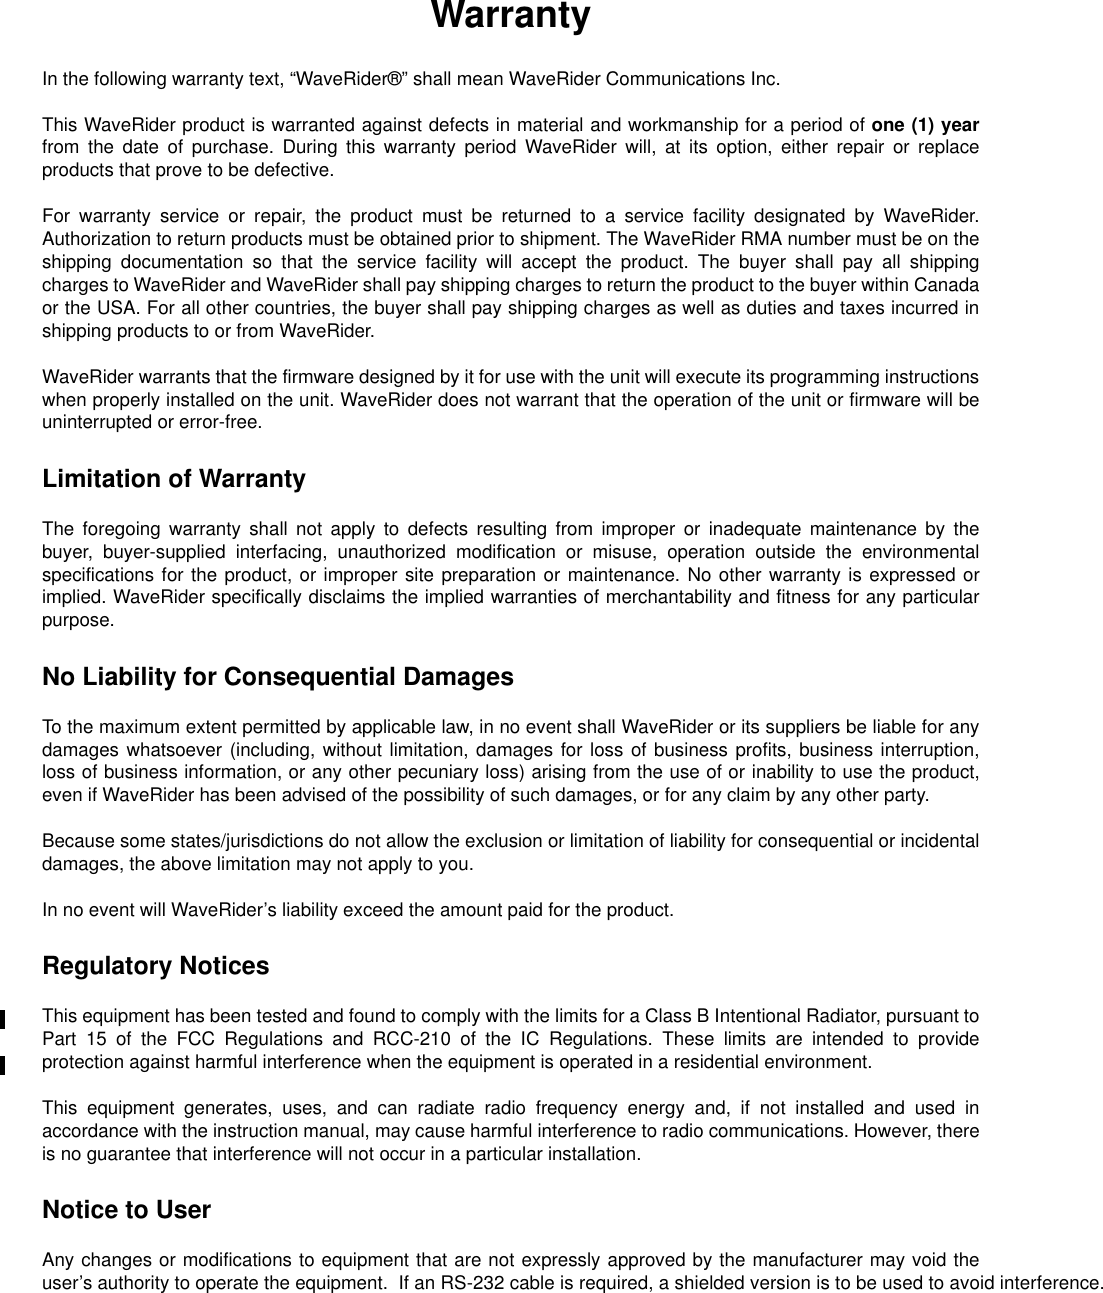 WarrantyIn the following warranty text, “WaveRider®” shall mean WaveRider CommunicationsInc.This WaveRider product is warranted against defects in material and workmanship for a period of one (1) yearfrom the date of purchase. During this warranty period WaveRider will, at its option, either repair or replaceproducts that prove to be defective.For warranty service or repair, the product must be returned to a service facility designated by WaveRider.Authorization to return products must be obtained prior to shipment. The WaveRider RMA number must be on theshipping documentation so that the service facility will accept the product. The buyer shall pay all shippingcharges to WaveRider and WaveRider shall pay shipping charges to return the product to the buyer within Canadaor the USA. For all other countries, the buyer shall pay shipping charges as well as duties and taxes incurred inshipping products to or from WaveRider.WaveRider warrants that the firmware designed by it for use with the unit will execute its programming instructionswhen properly installed on the unit. WaveRider does not warrant that the operation of the unit or firmware will beuninterrupted or error-free.Limitation of WarrantyThe foregoing warranty shall not apply to defects resulting from improper or inadequate maintenance by thebuyer, buyer-supplied interfacing, unauthorized modification or misuse, operation outside the environmentalspecifications for the product, or improper site preparation or maintenance. No other warranty is expressed orimplied. WaveRider specifically disclaims the implied warranties of merchantability and fitness for any particularpurpose.No Liability for Consequential DamagesTo the maximum extent permitted by applicable law, in no event shall WaveRider or its suppliers be liable for anydamages whatsoever (including, without limitation, damages for loss of business profits, business interruption,loss of business information, or any other pecuniary loss) arising from the use of or inability to use the product,even if WaveRider has been advised of the possibility of such damages, or for any claim by any other party.Because some states/jurisdictions do not allow the exclusion or limitation of liability for consequential or incidentaldamages, the above limitation may not apply to you.In no event will WaveRider’s liability exceed the amount paid for the product.Regulatory NoticesThis equipment has been tested and found to comply with the limits for a Class B Intentional Radiator, pursuant toPart 15 of the FCC Regulations and RCC-210 of the IC Regulations. These limits are intended to provideprotection against harmful interference when the equipment is operated in a residential environment.This equipment generates, uses, and can radiate radio frequency energy and, if not installed and used inaccordance with the instruction manual, may cause harmful interference to radio communications. However, thereis no guarantee that interference will not occur in a particular installation.Notice to UserAny changes or modifications to equipment that are not expressly approved by the manufacturer may void theuser’s authority to operate the equipment.  If an RS-232 cable is required, a shielded version is to be used to avoid interference.